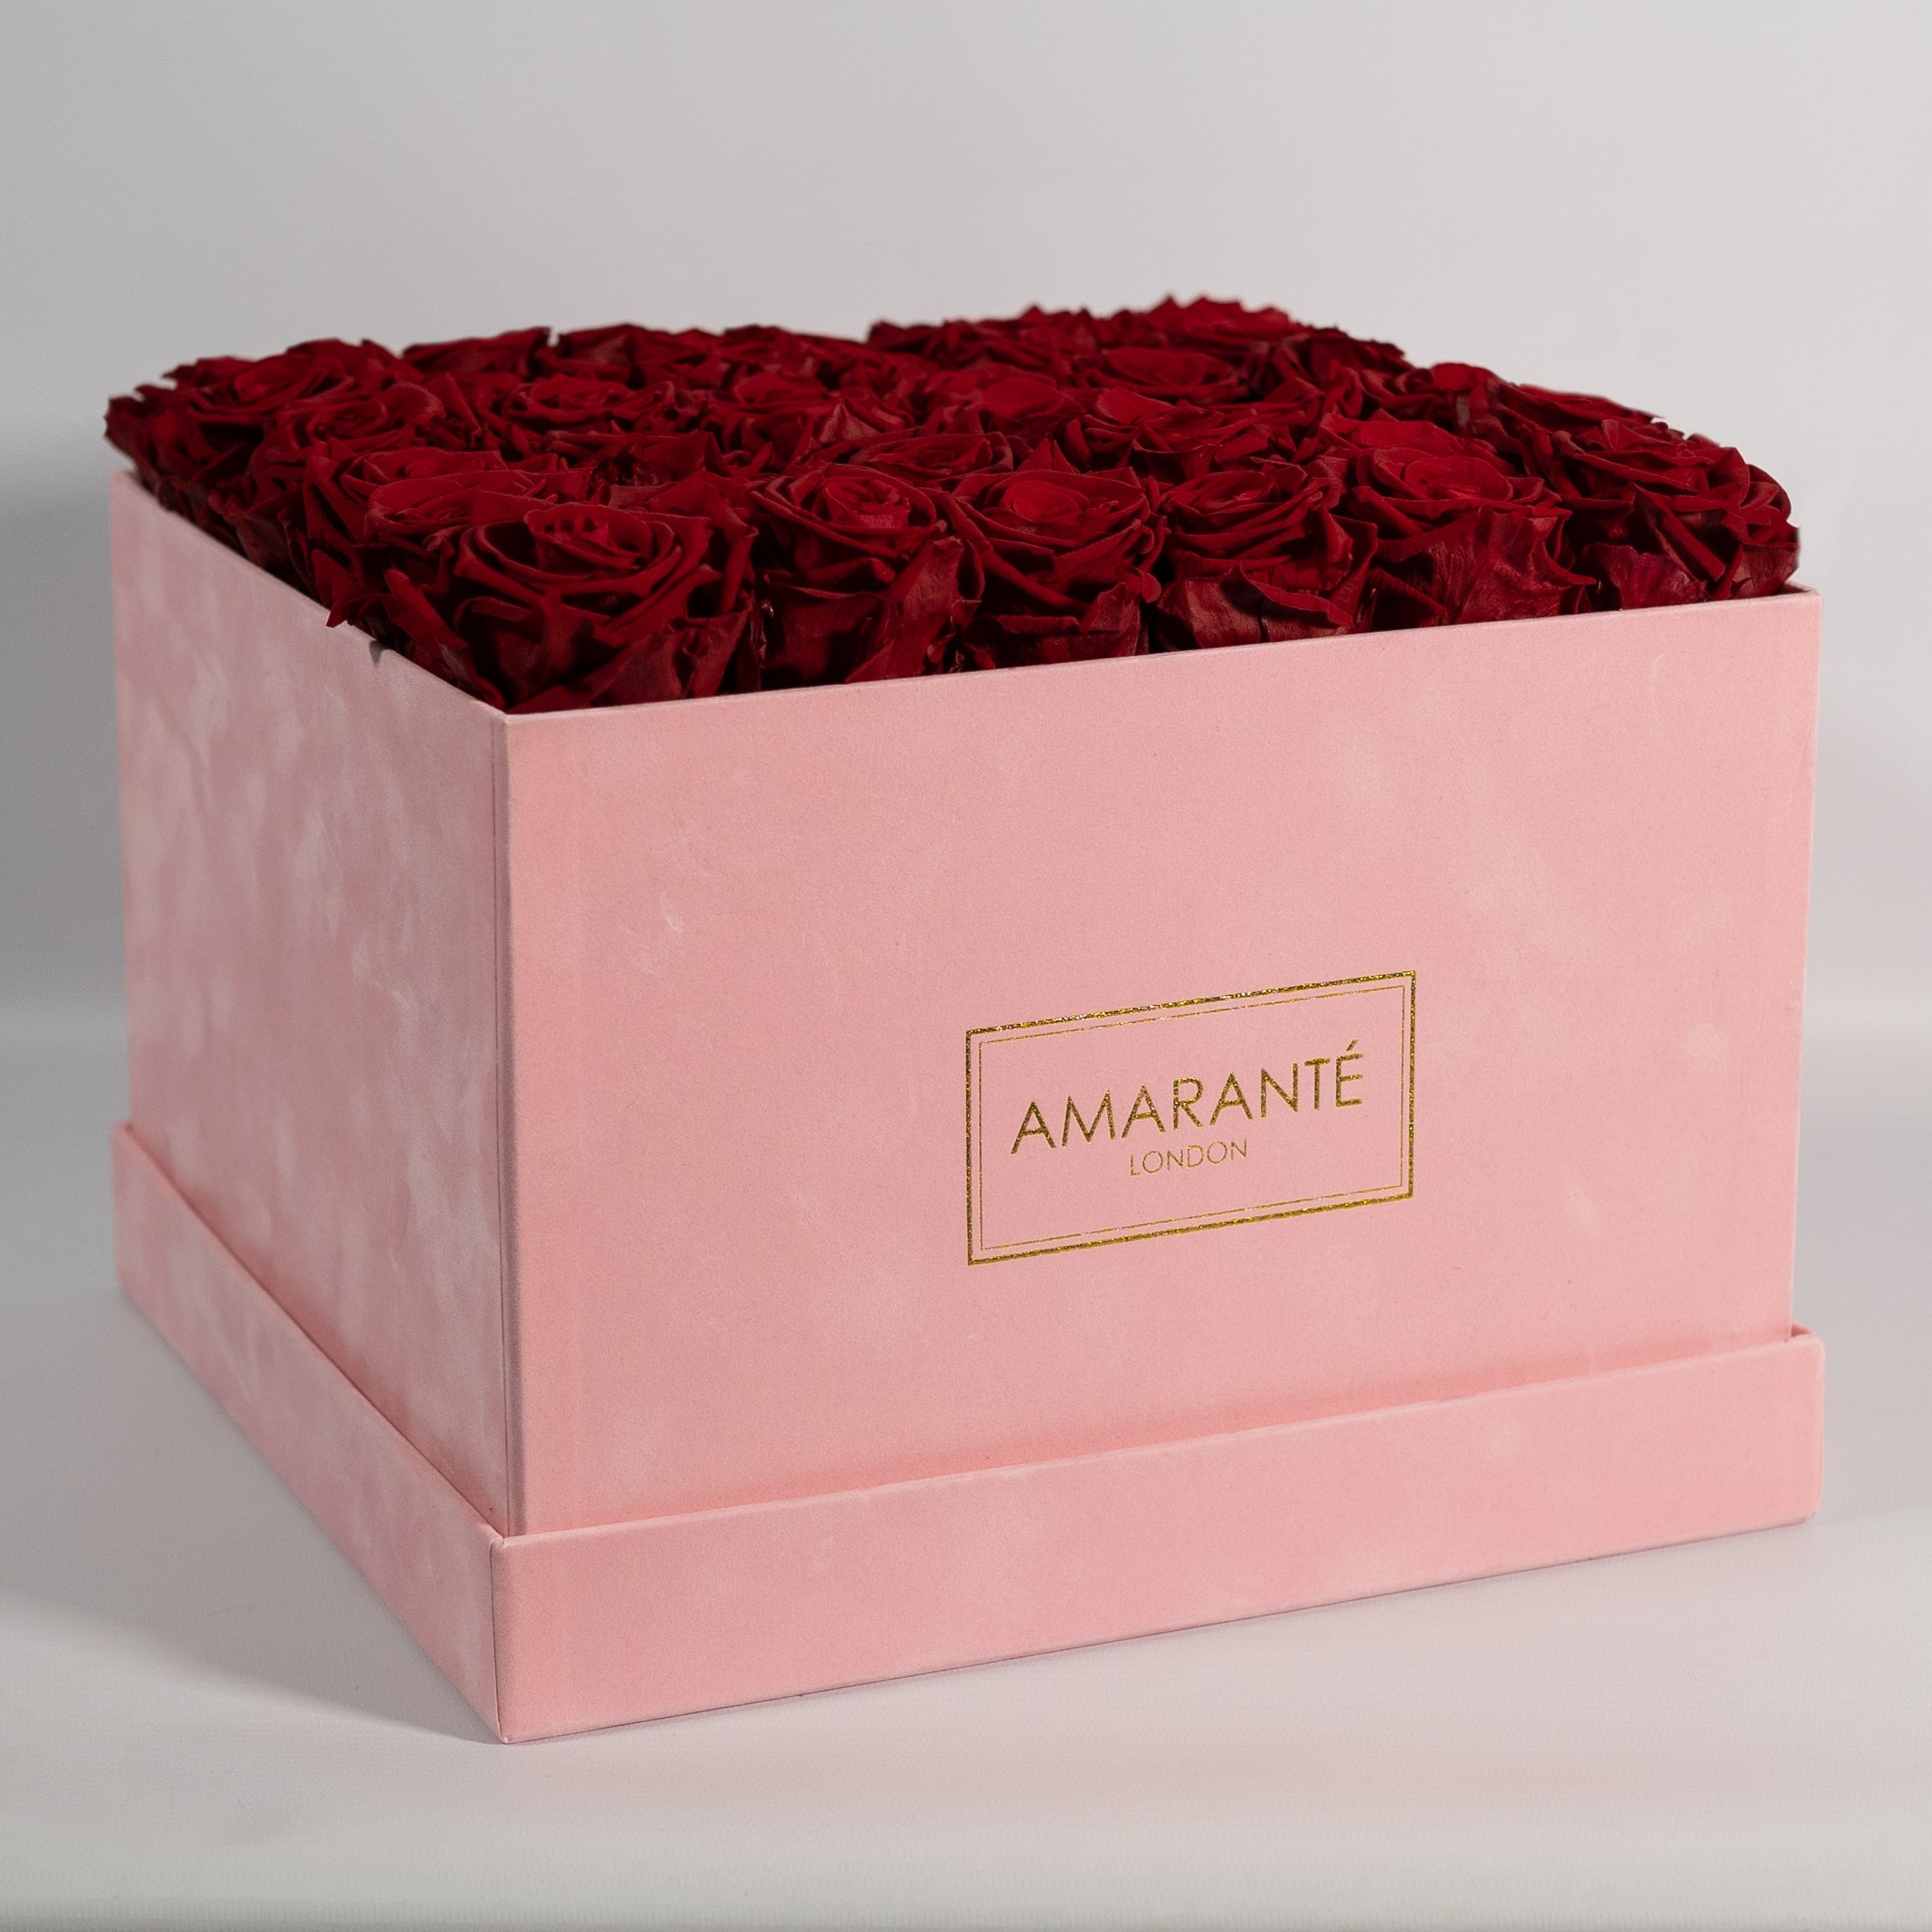 Majestic wine red roses shown in a blushing pink box 